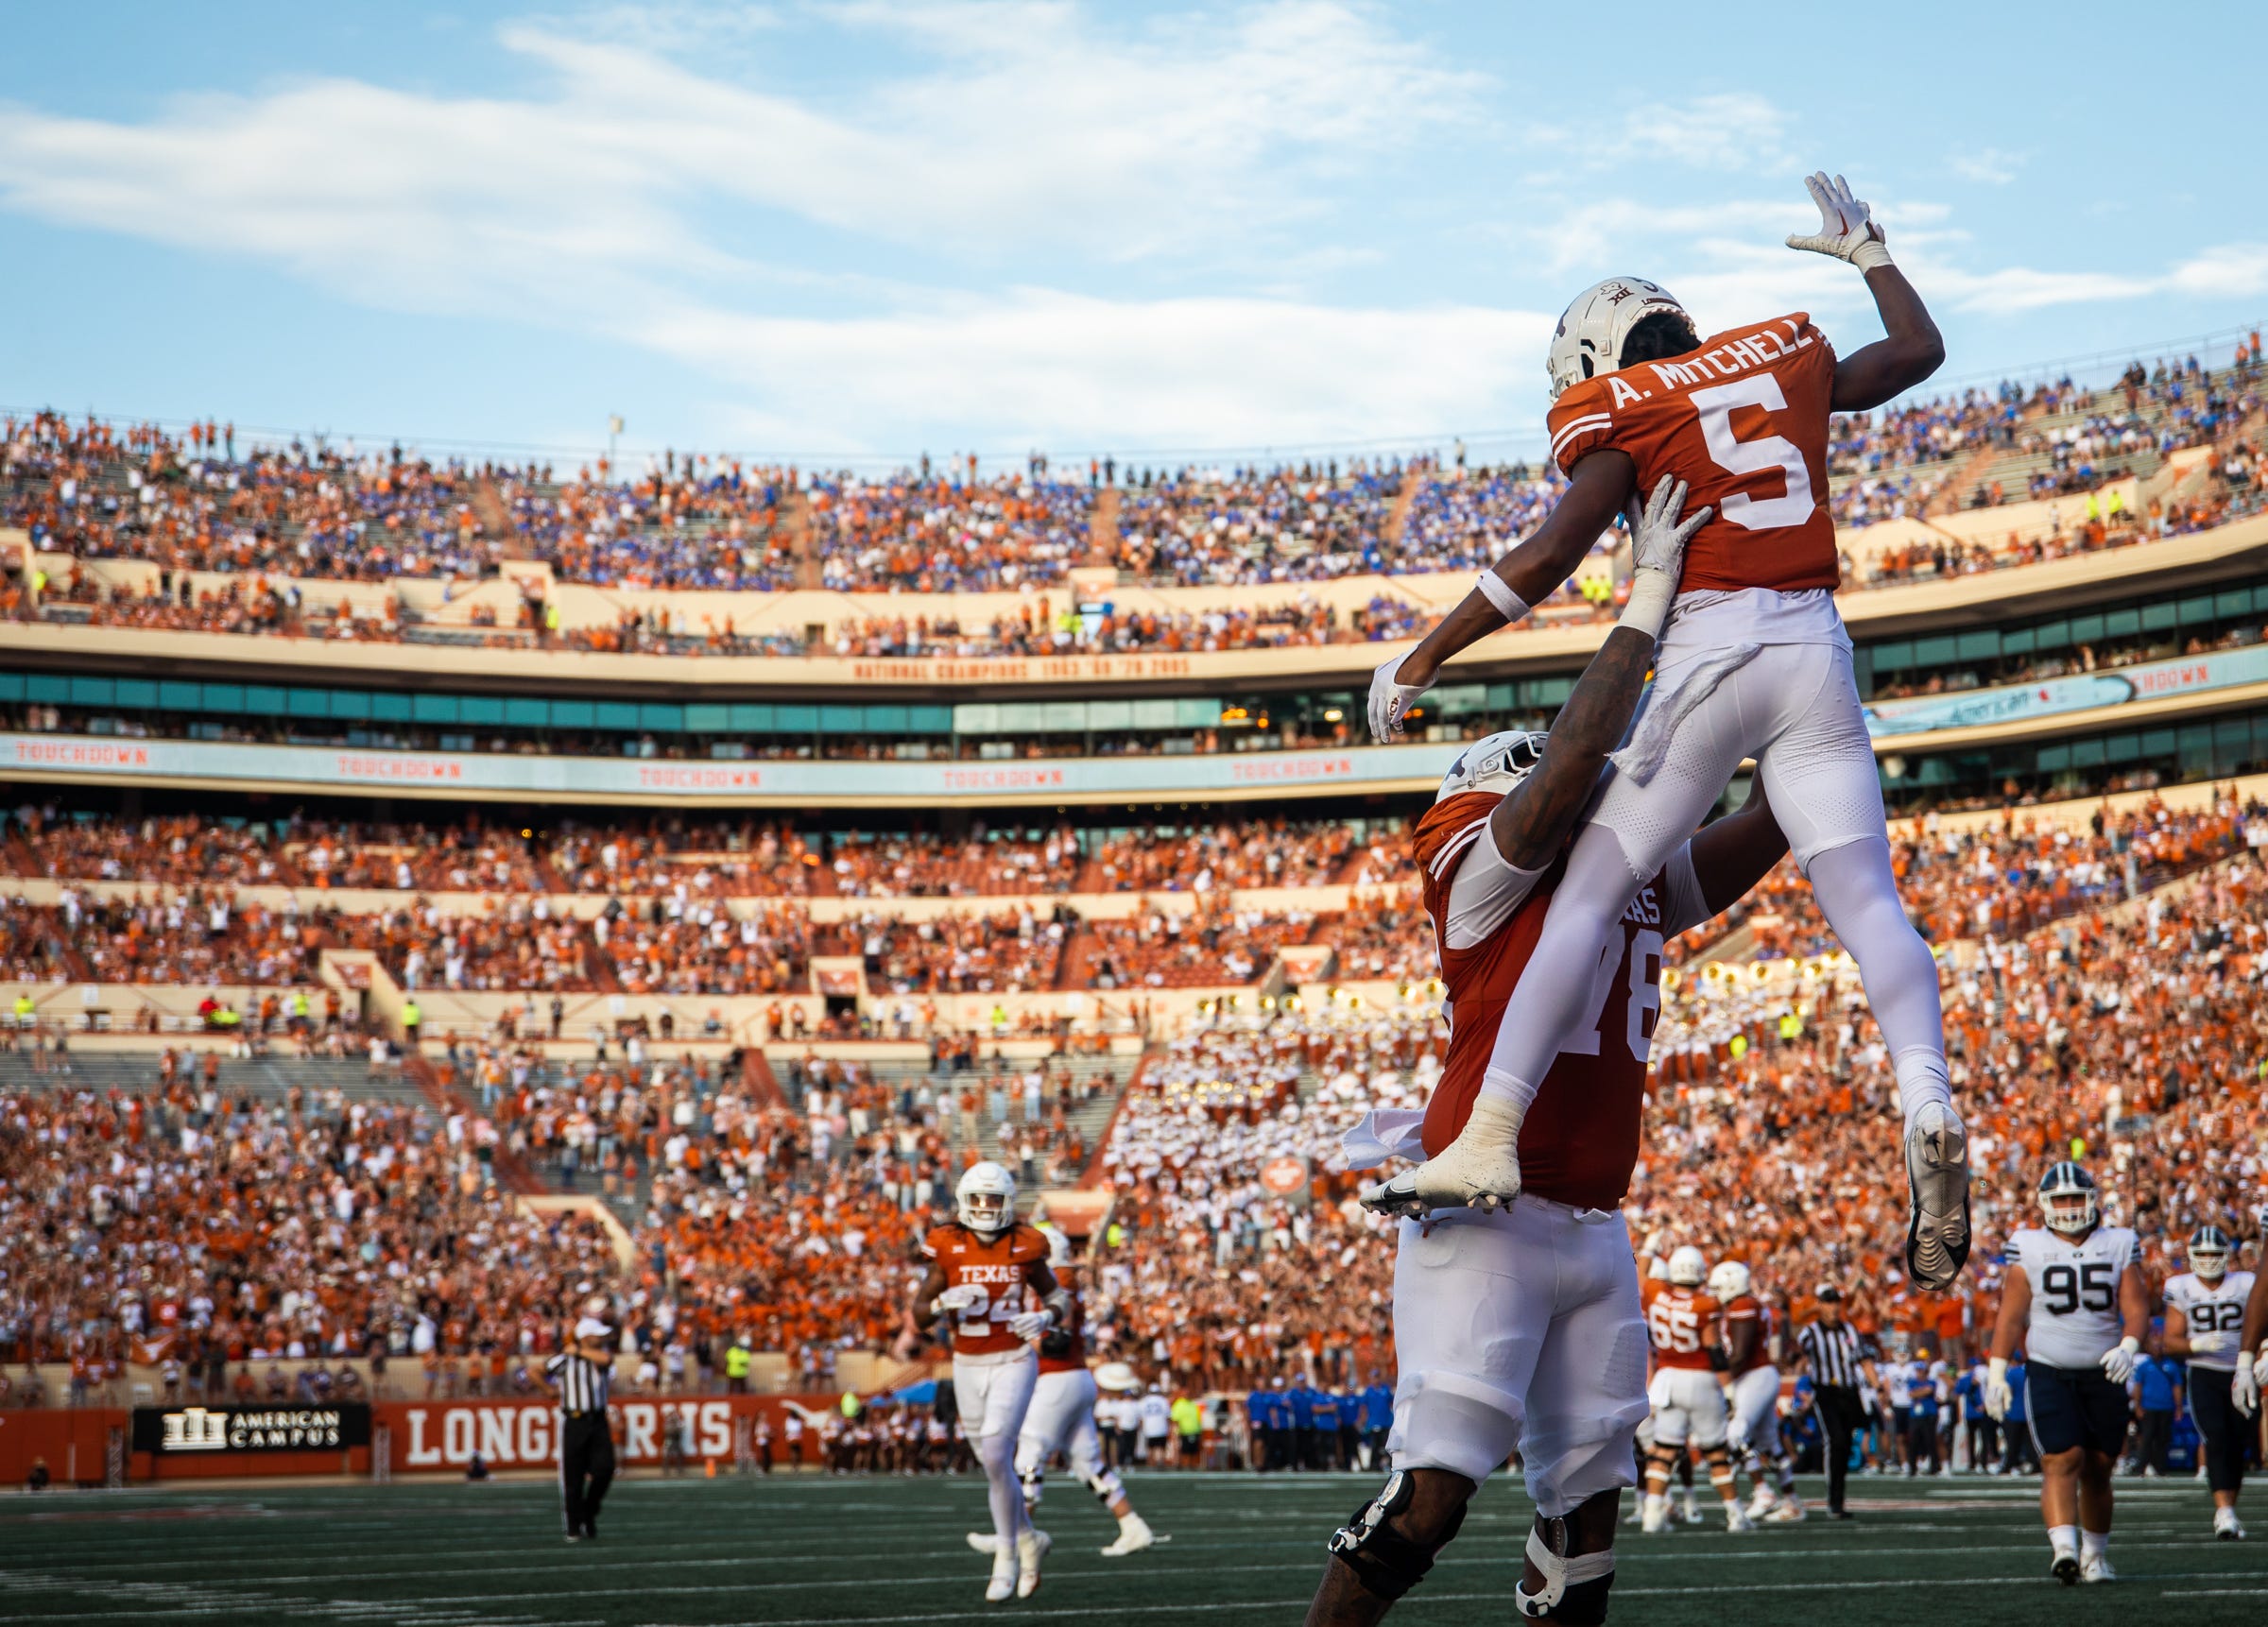 Texas offensive lineman Kelvin Banks Jr. (78) lifts Texas wide receiver Adonai Mitchell (5) after his touchdown in the fourth quarter of the Longhorns' game against the BYU Cougars at Darrell K Royal-Texas Memorial Stadium in Austin, Saturday, Oct. 28, 2023. Texas won the game 35-6.